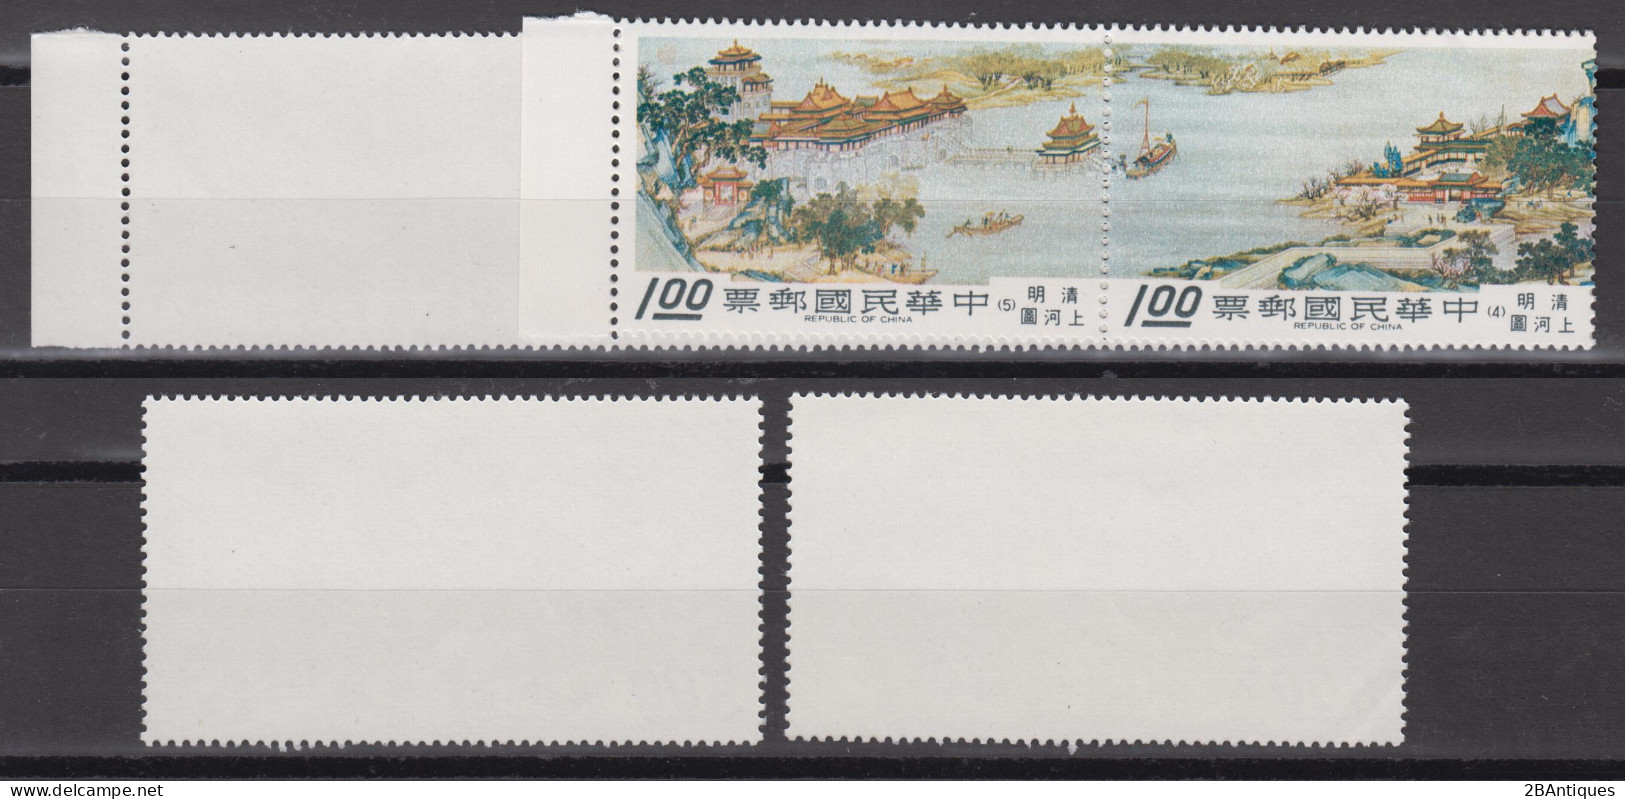 TAIWAN 1968 - "A City Of Cathay", Scroll, Palace Museum COMPLETE SET MNH** OG XF - Ungebraucht